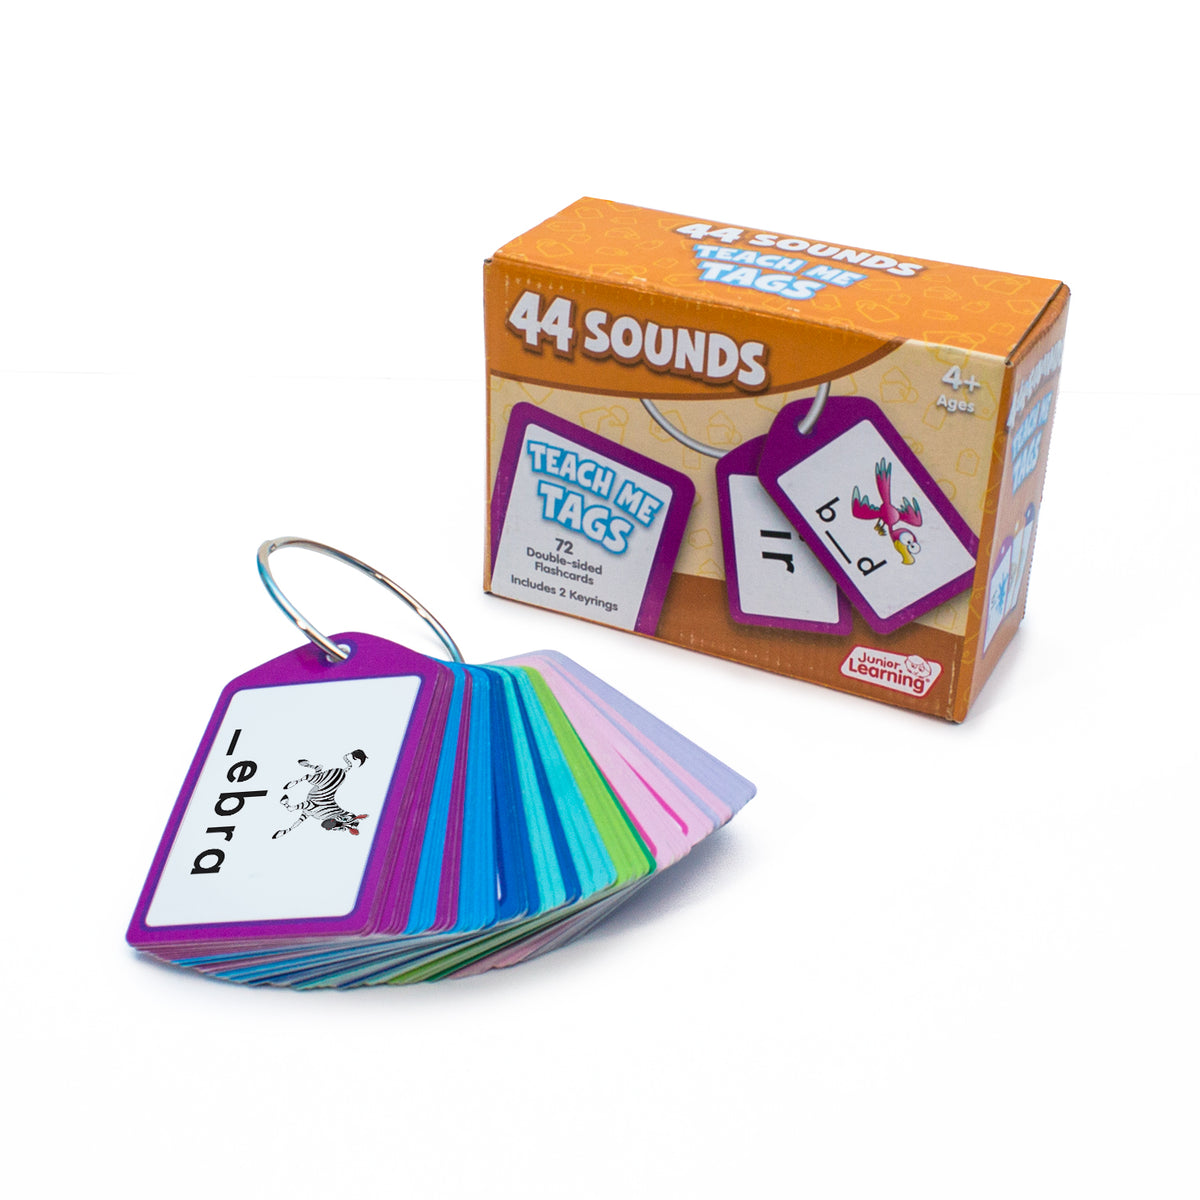 Junior Learning JL627 44 Sounds Teach Me Tags box and cards